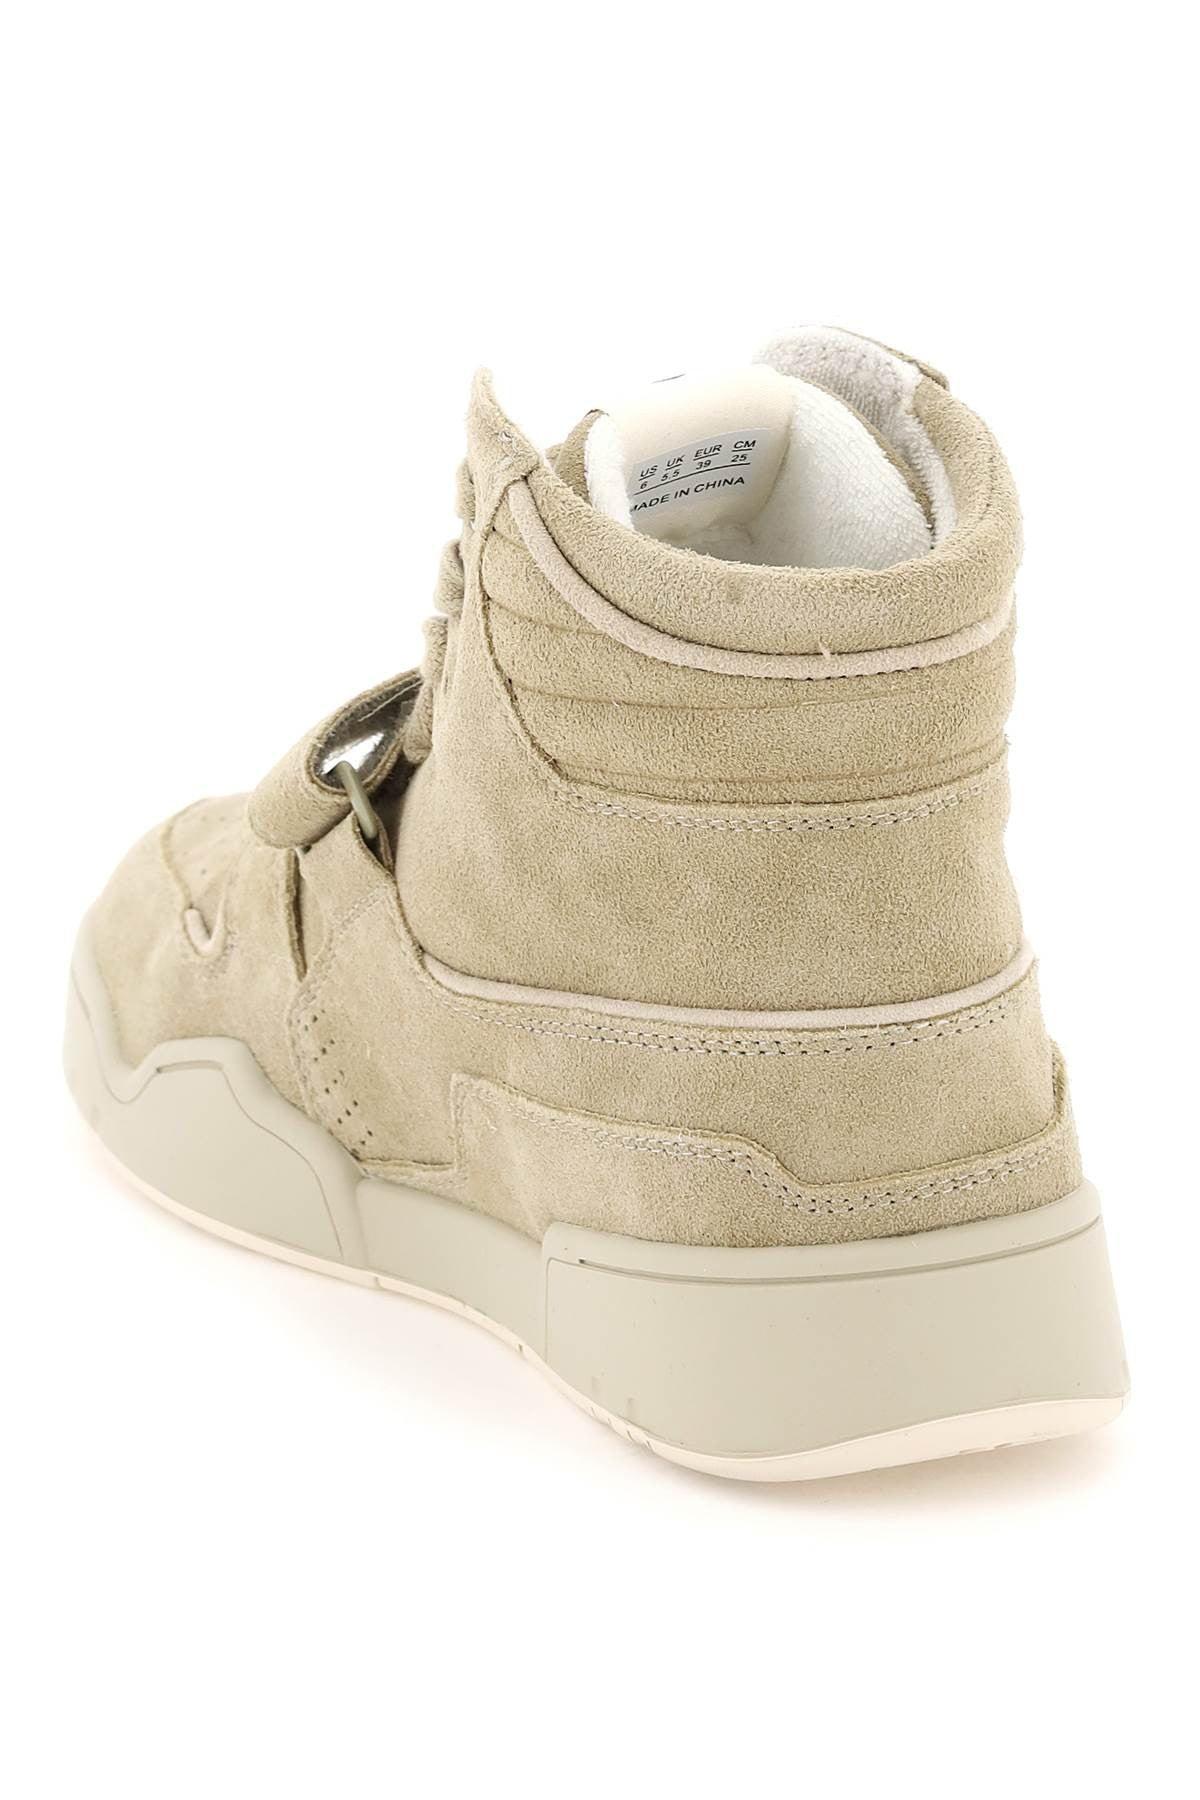 Isabel Marant 'alsee' Sneakers in Natural | Lyst